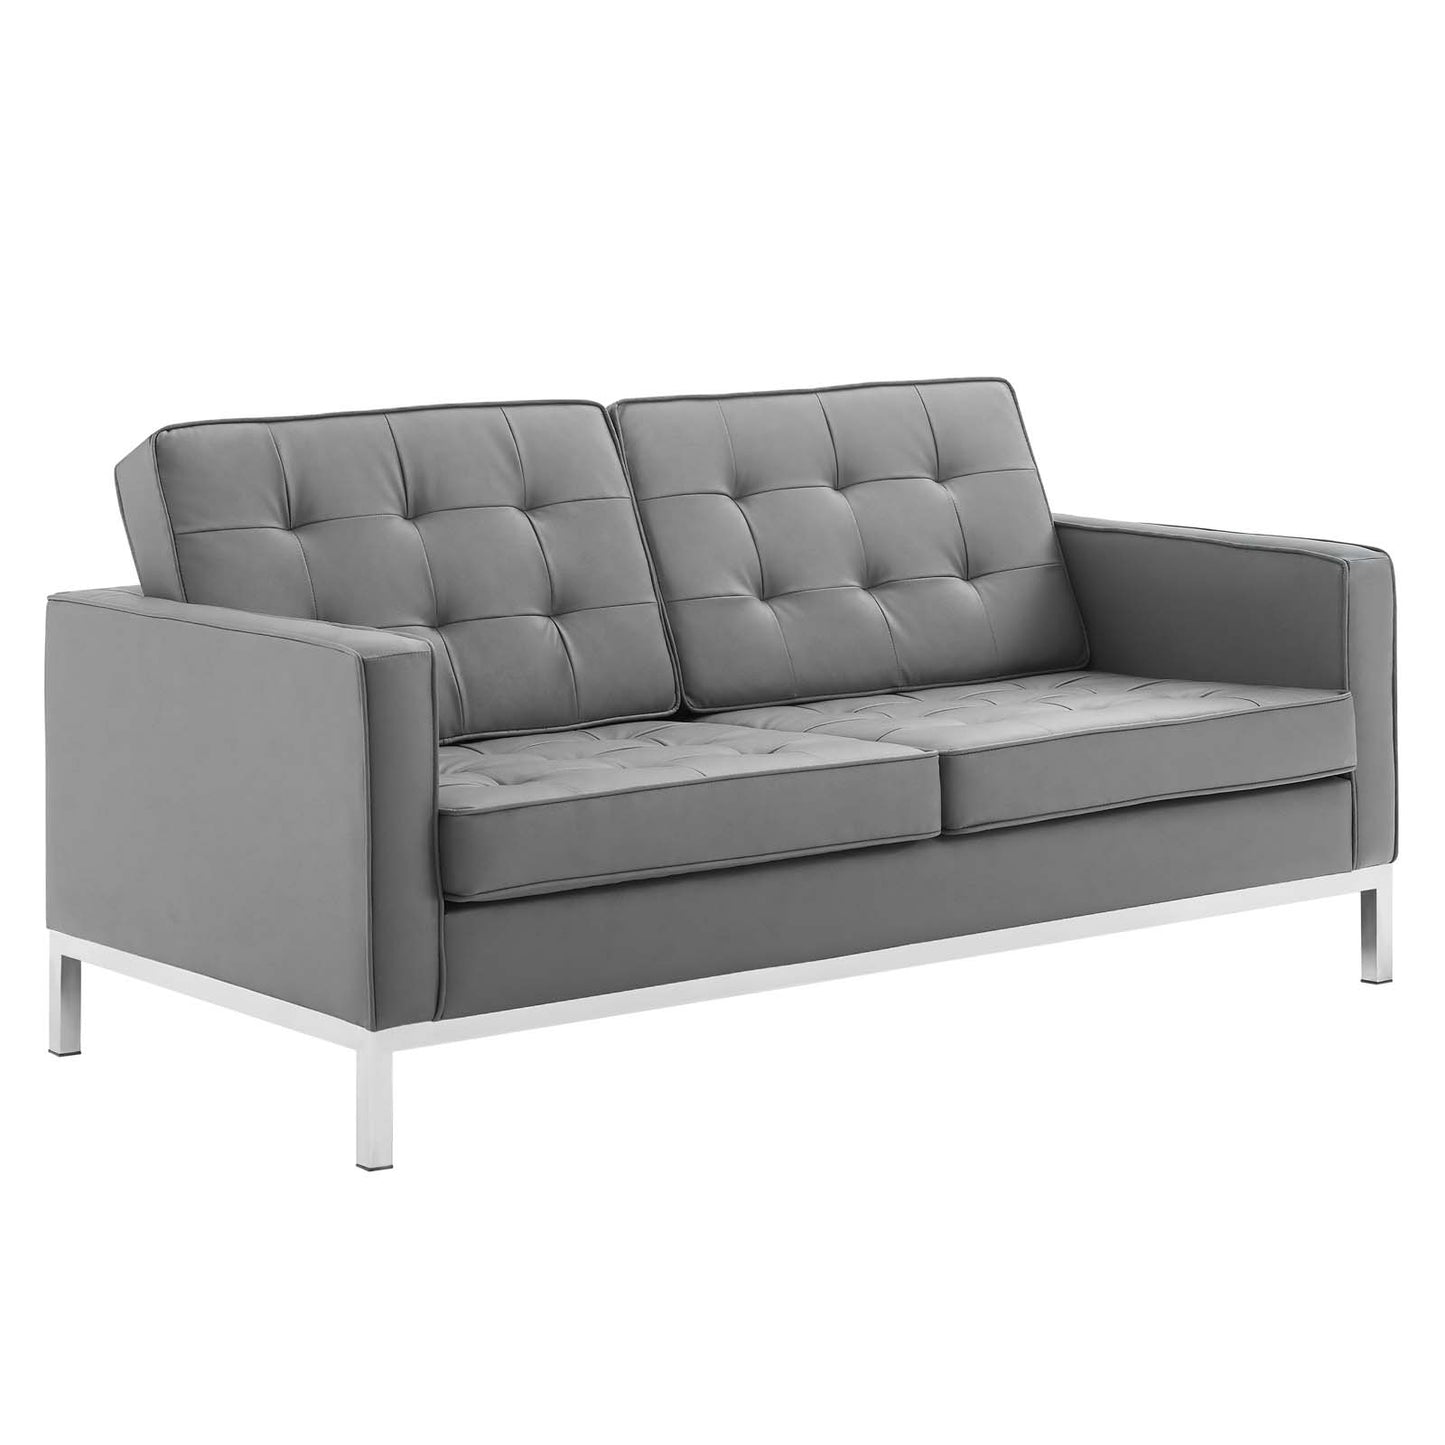 Modway Loft Tufted Upholstered Faux Leather Sofa and Loveseat Set - EEI-4106